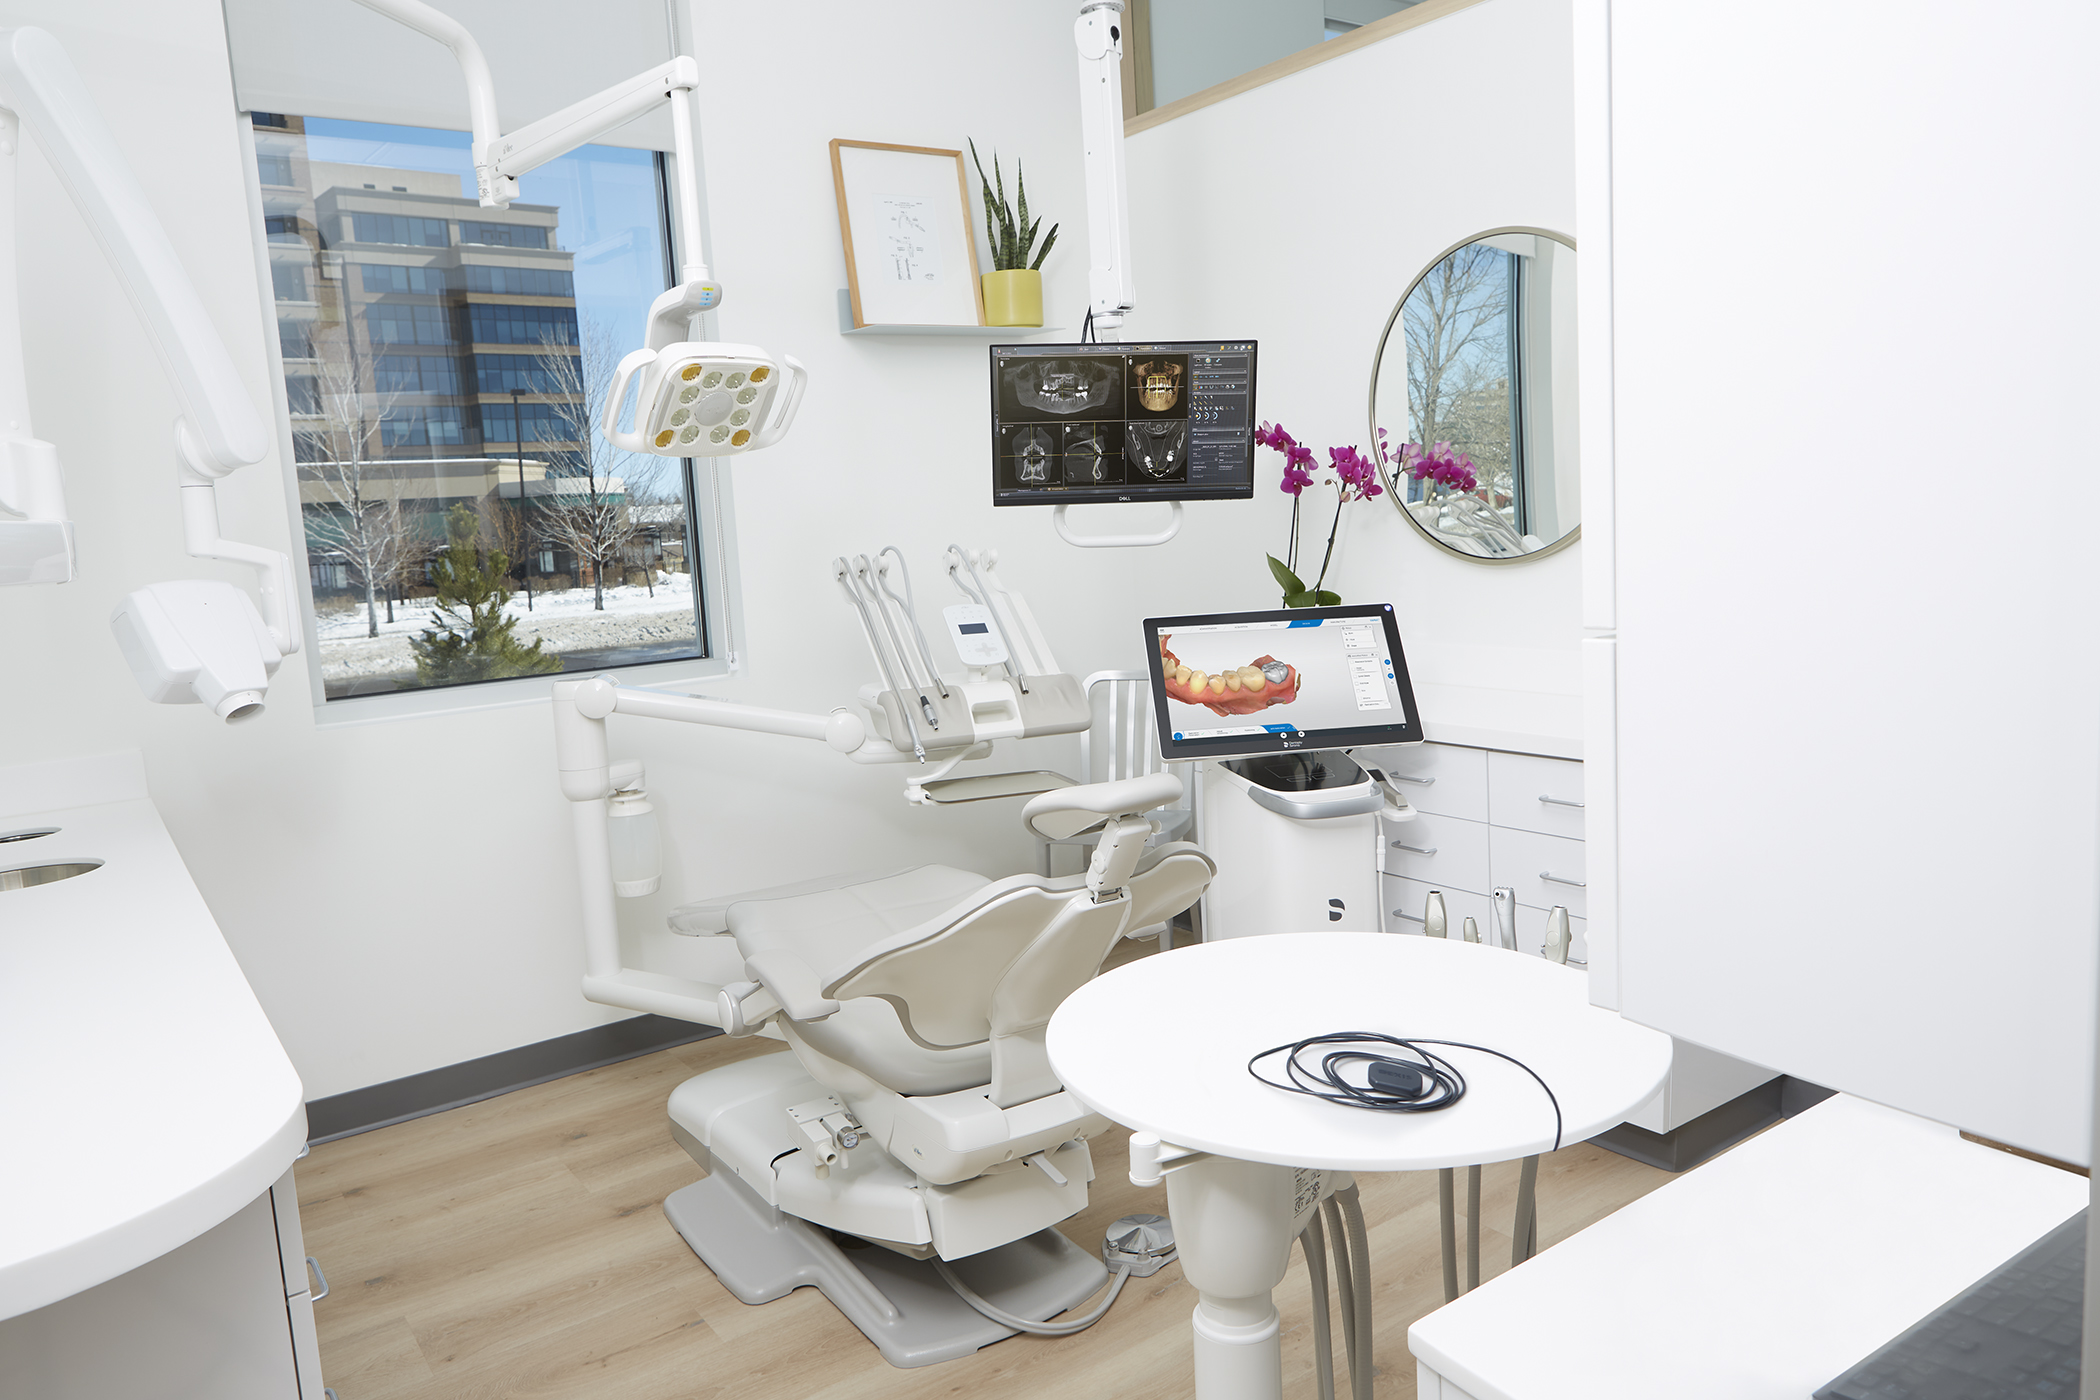 5 Things to Consider When Starting Your First Dental Practice